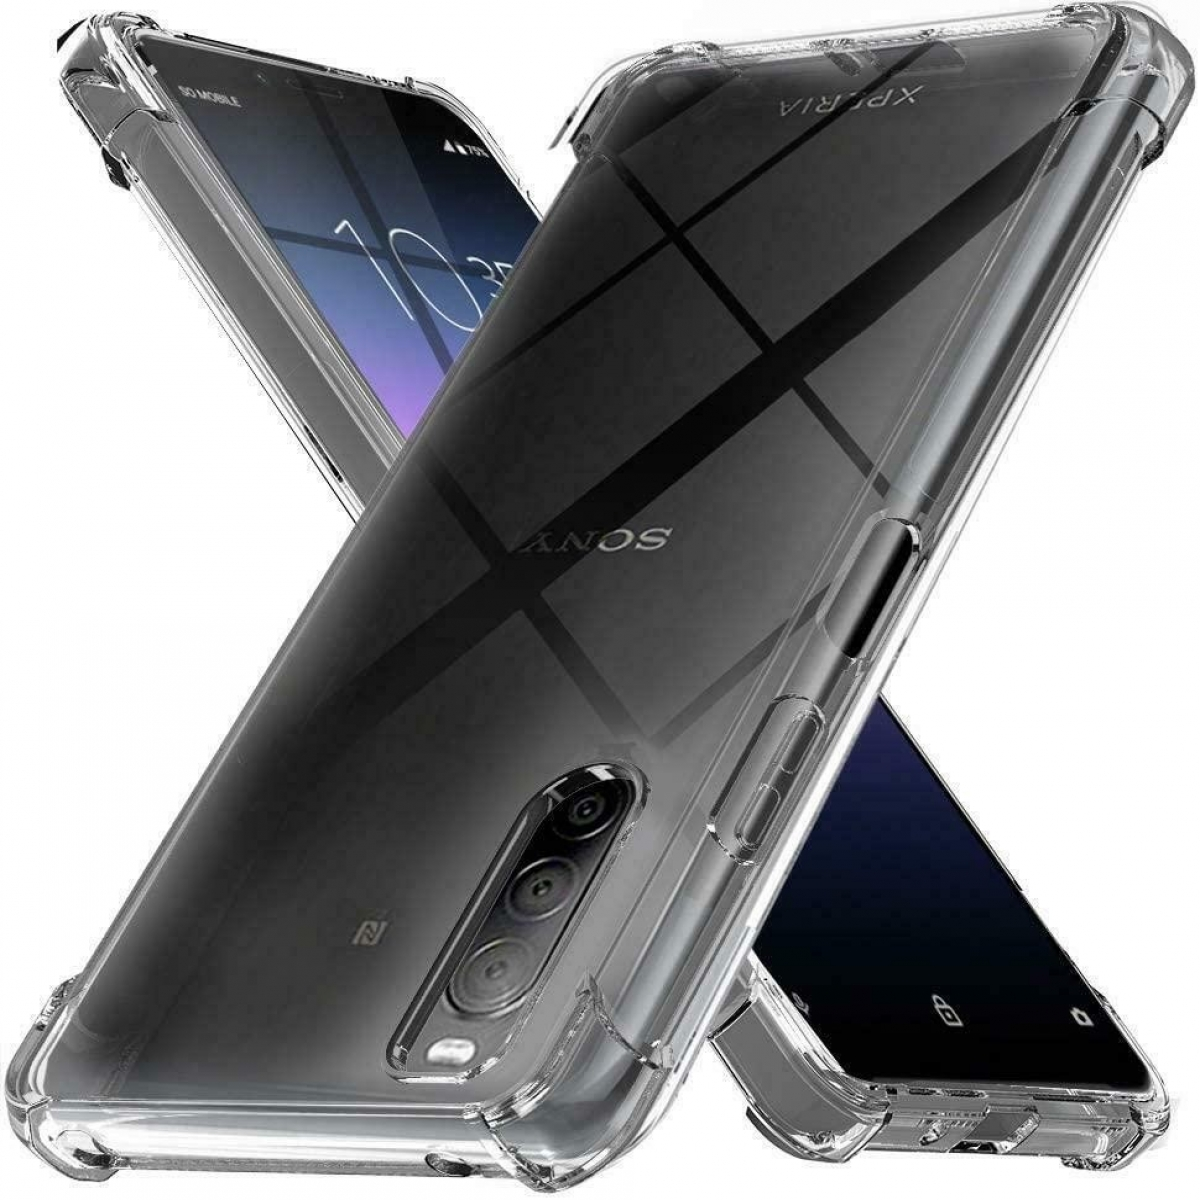 Backcover, CASEONLINE II, 5 Xperia Sony, Multicolor Shockproof,